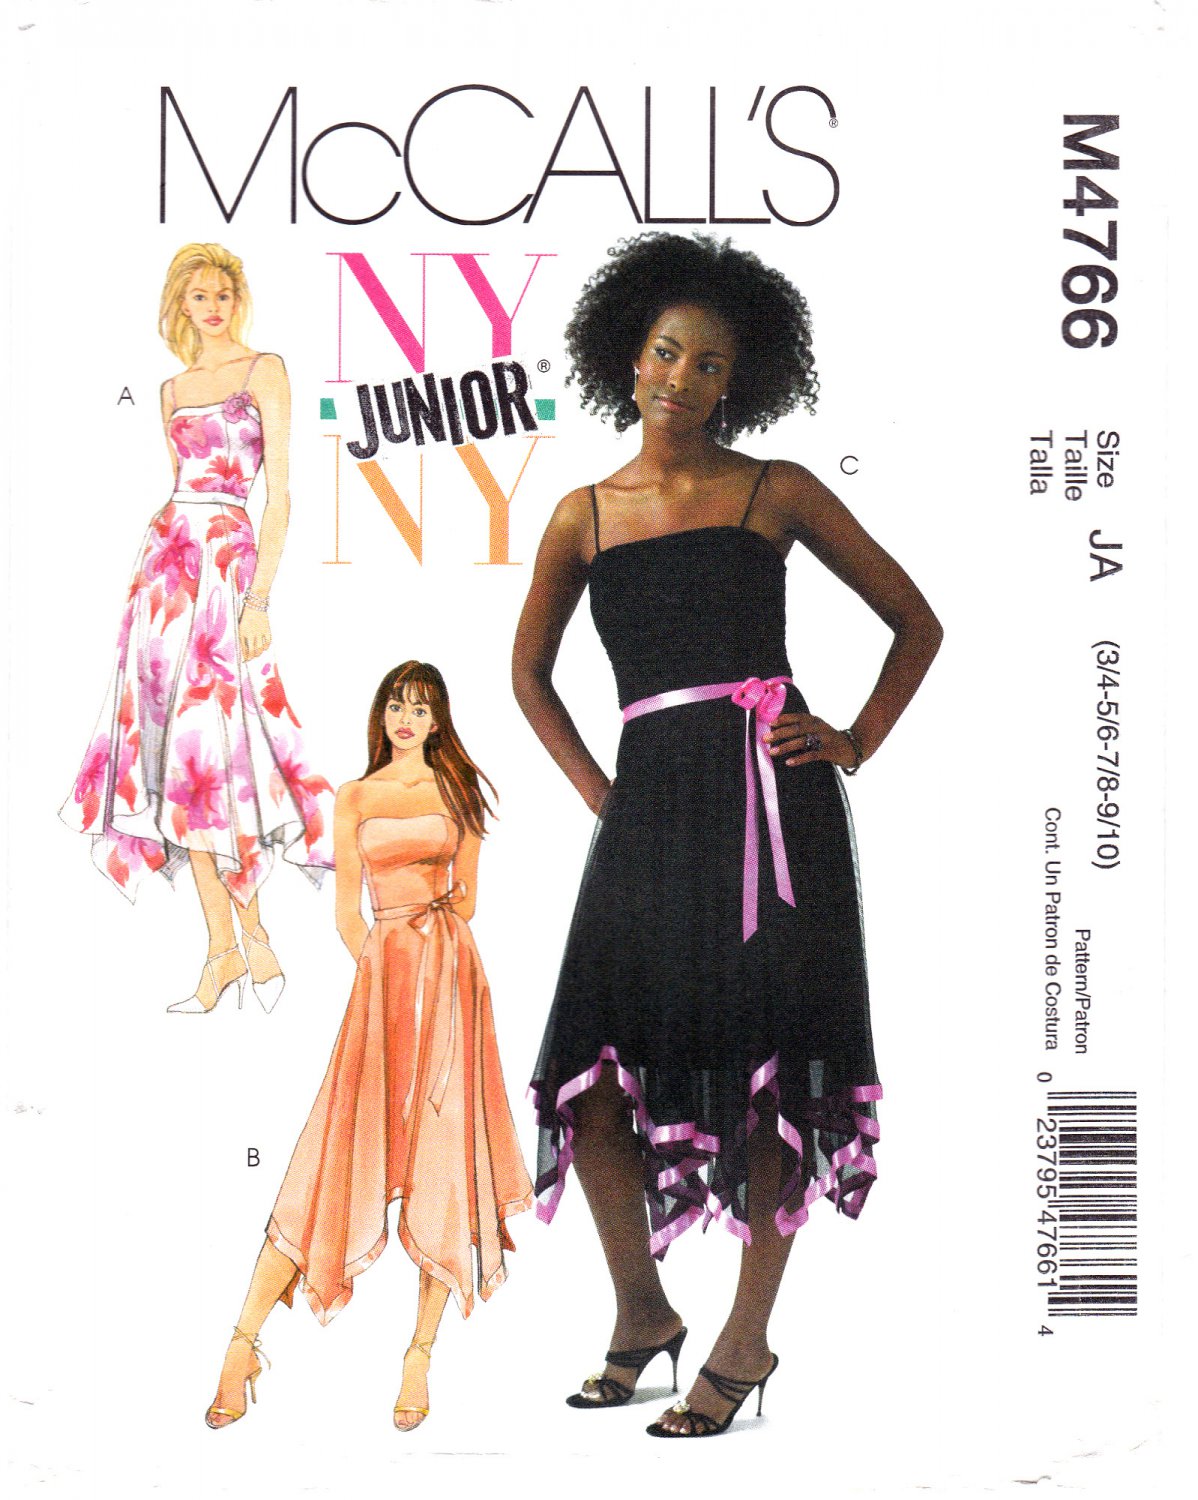 McCall's 4766 M4766 Junior Girls Sewing Pattern Lined Dress Teen Sizes 3/4-5/6-7/8-9/10 Dressy